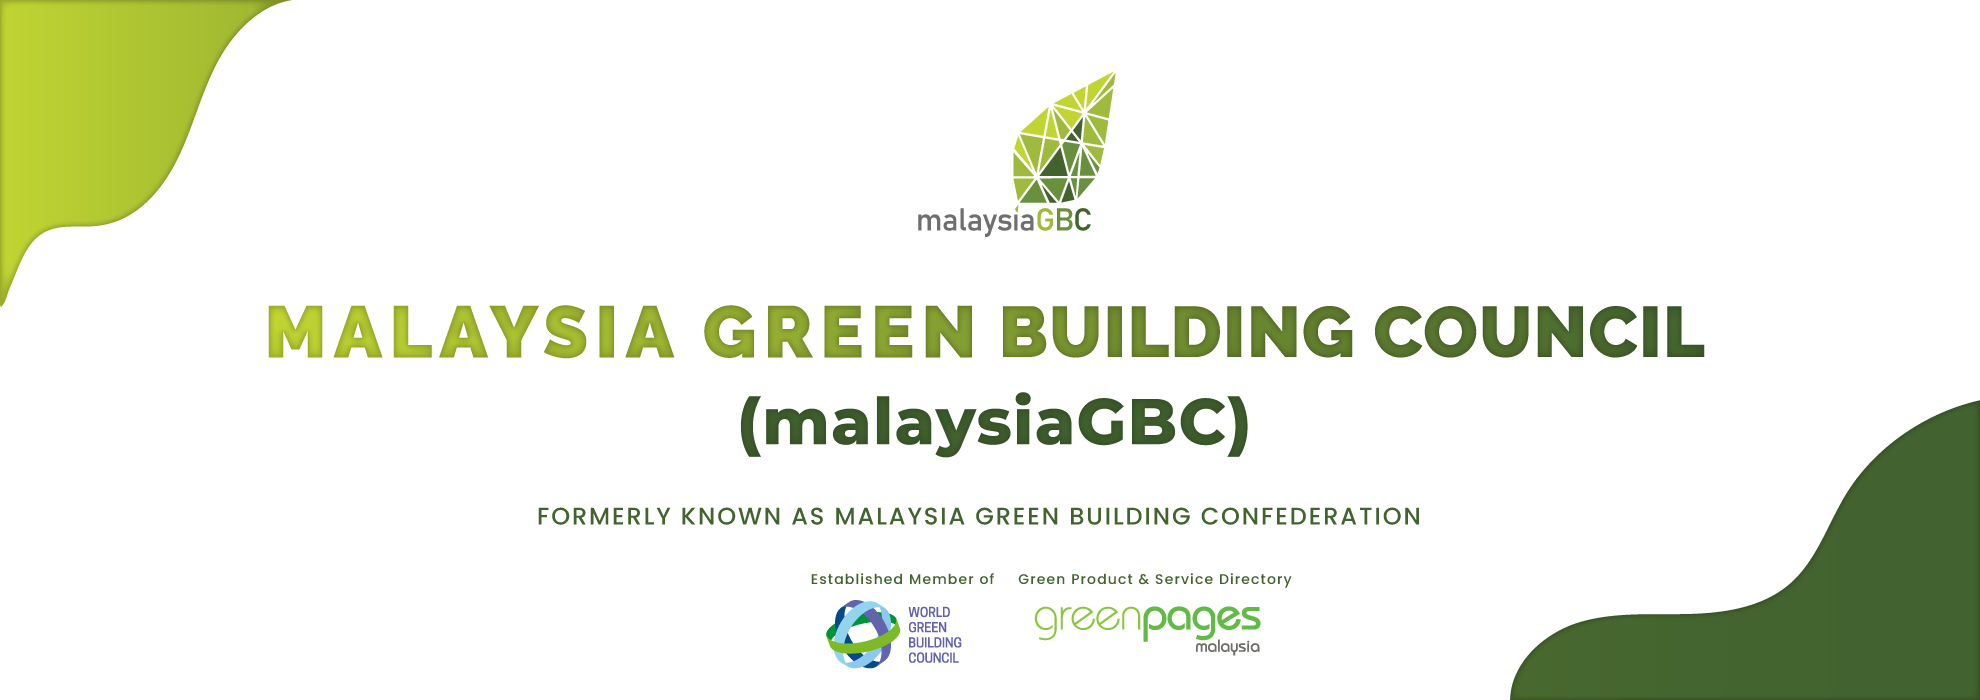 malaysiaGBC_Website-Banner-without-tm